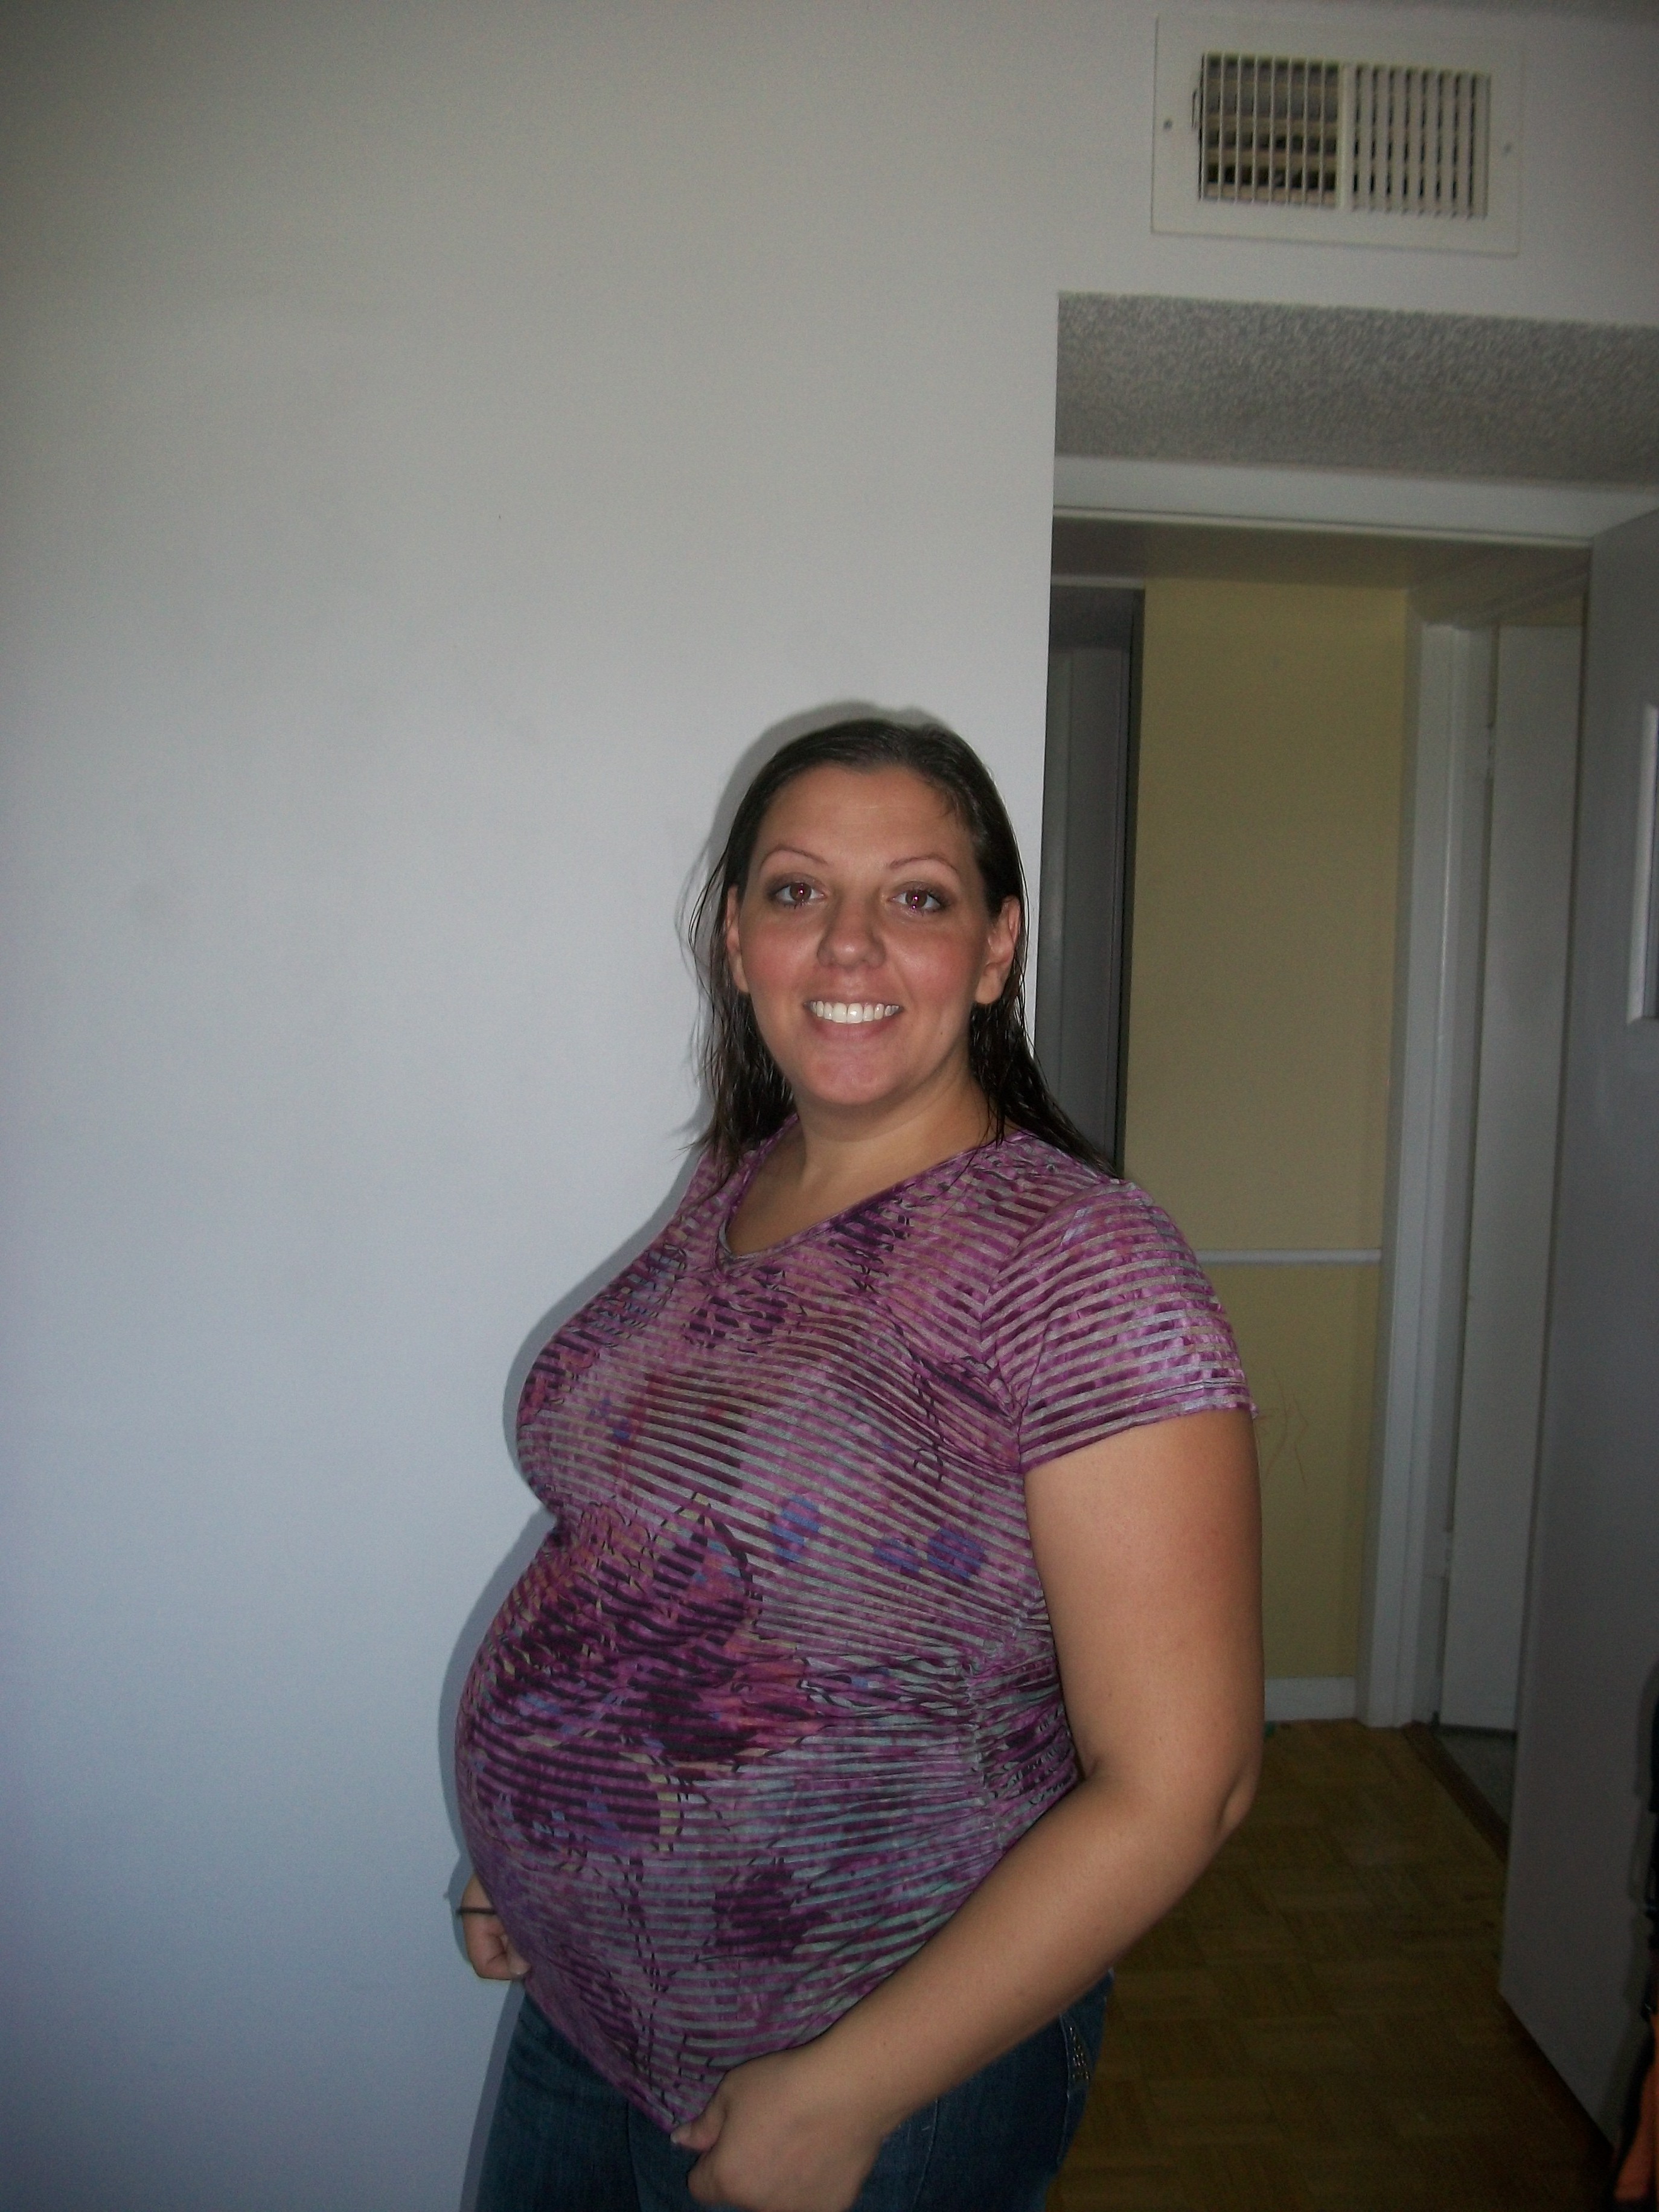 Fat Pregnant Pictures 49